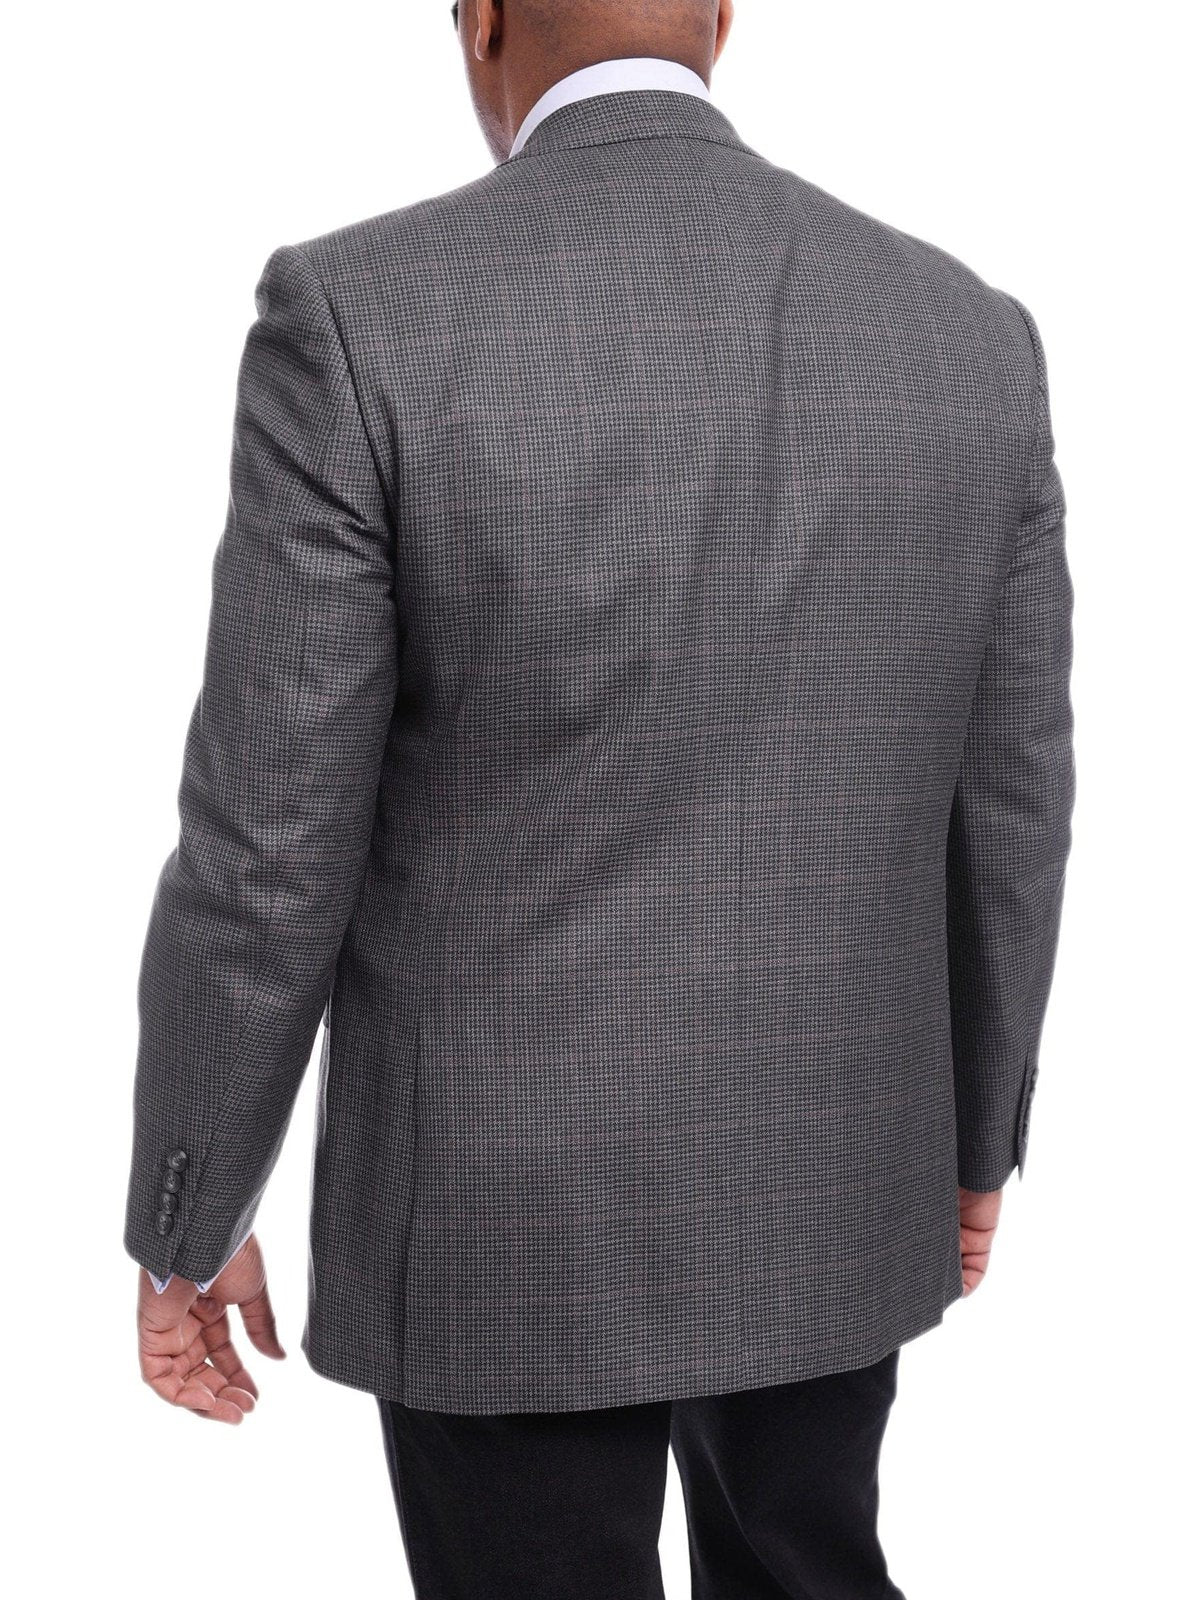 I Uomo Men's Classic Fit Gray Houndstooth Two Button Wool Blazer Sportcoat - The Suit Depot